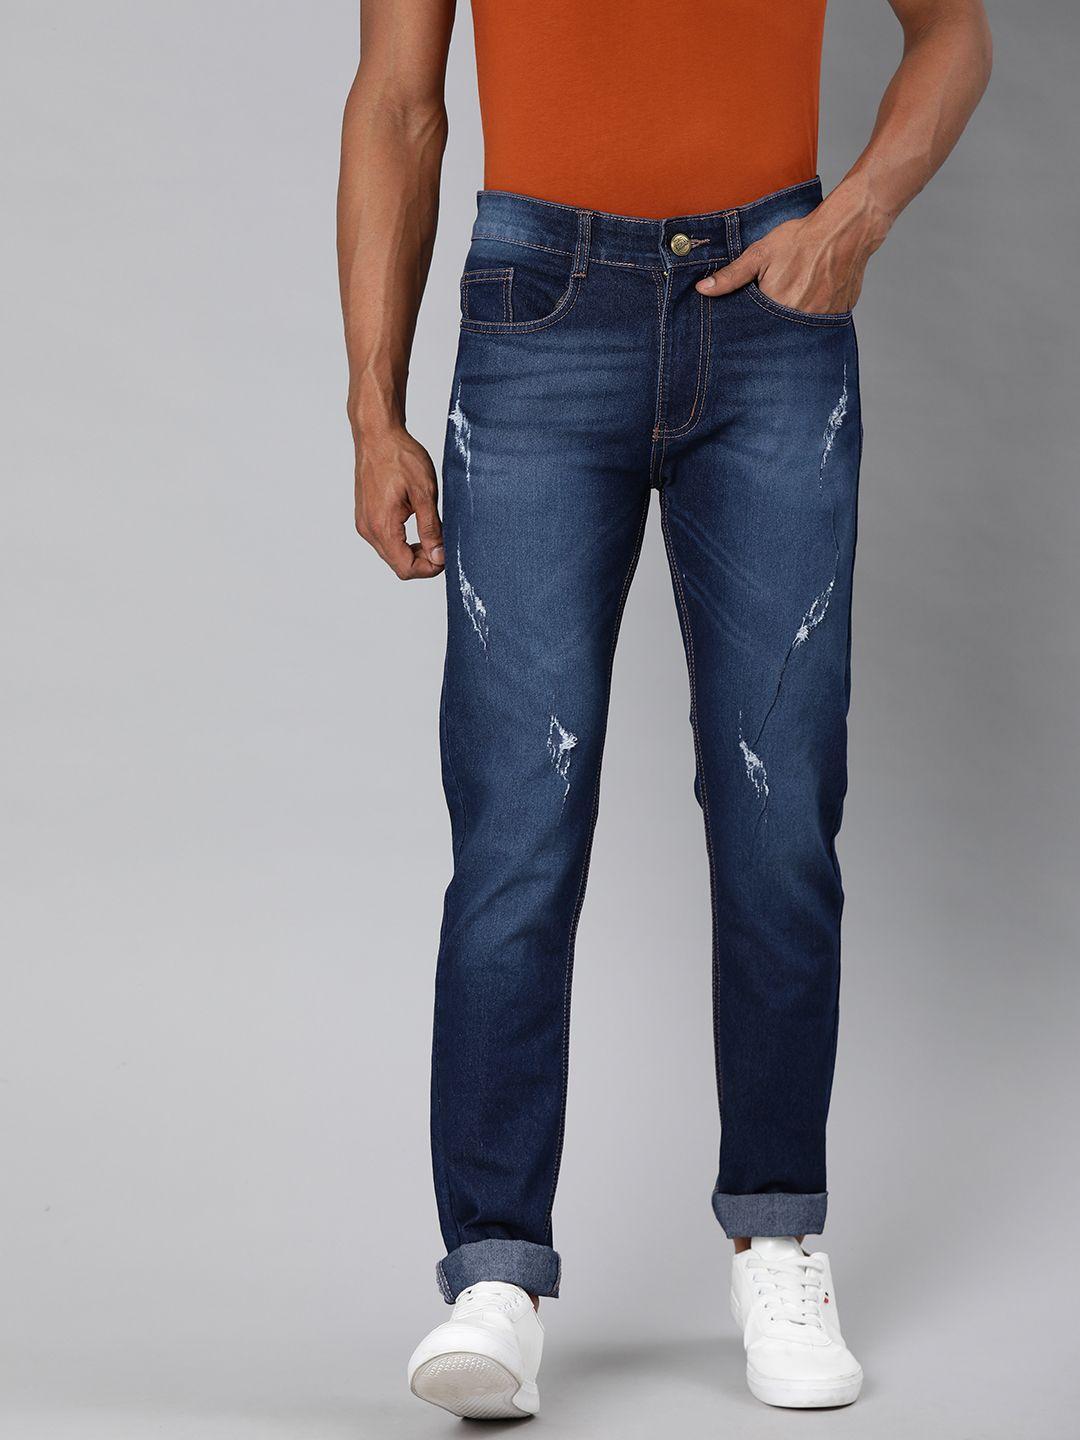 urbano-fashion-men-blue-slim-fit-mid-rise-mildly-distressed-stretchable-jeans